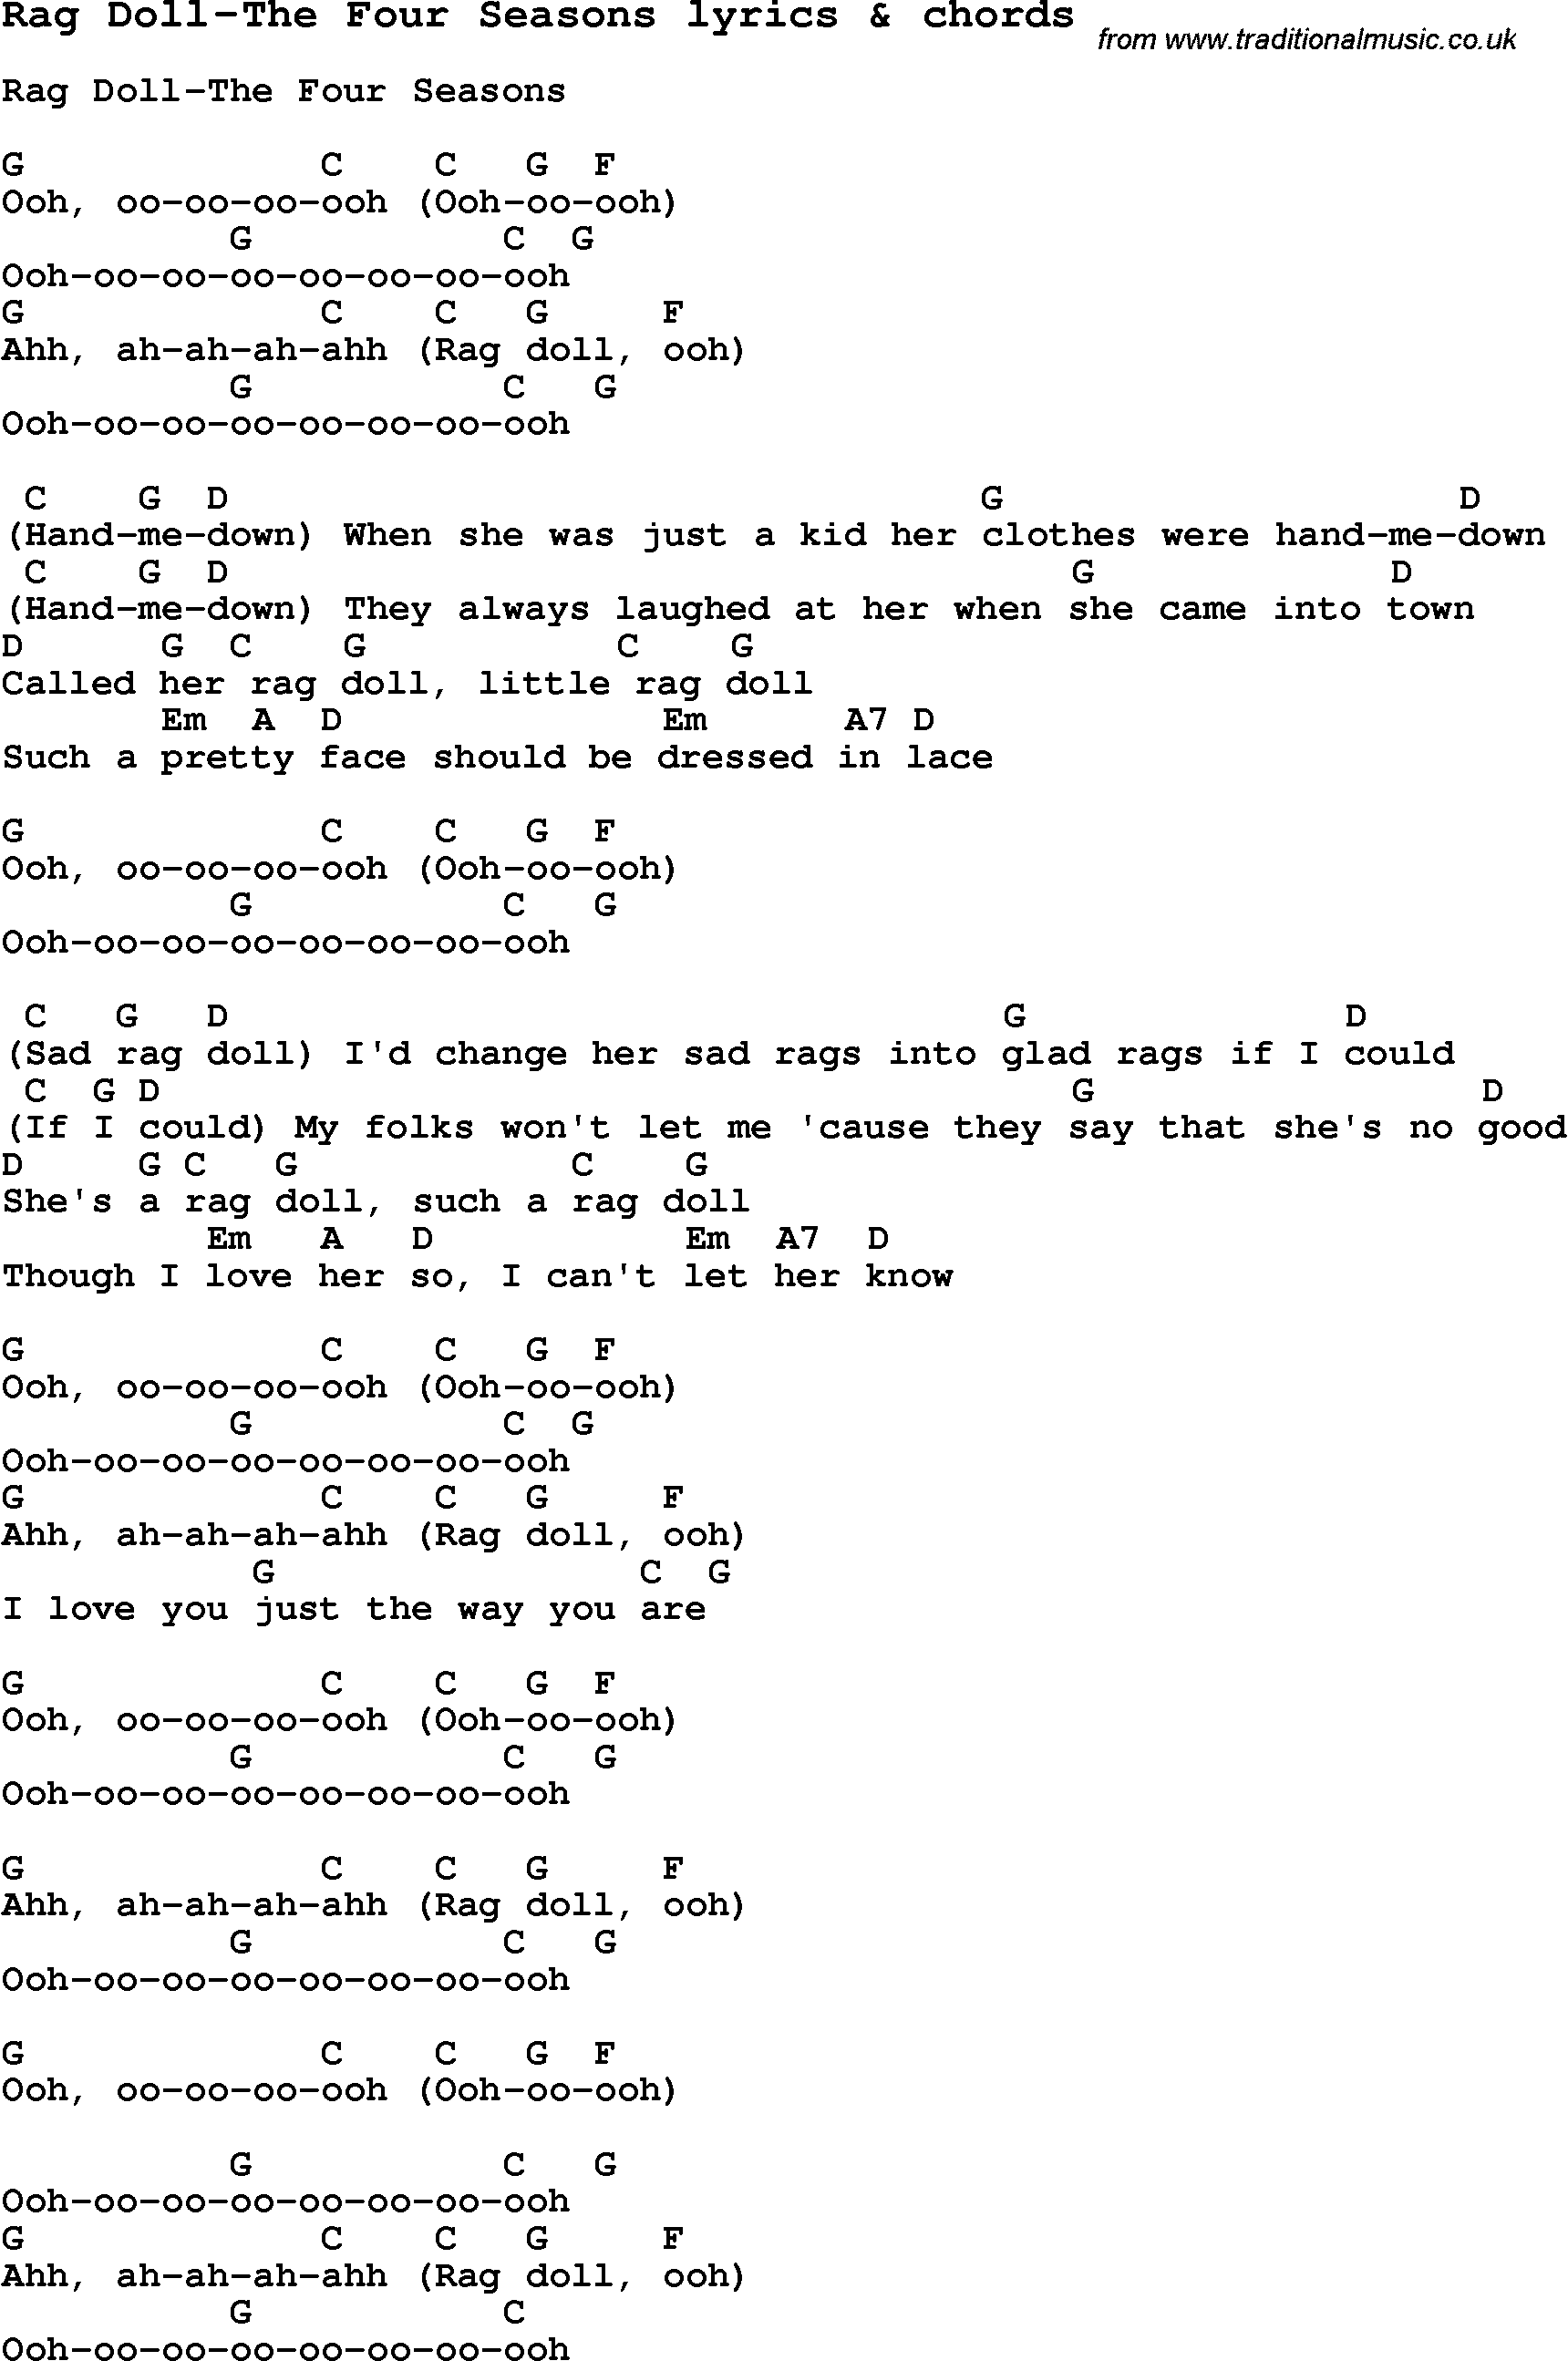 Love Song Lyrics For Rag Doll The Four Seasons With Chords